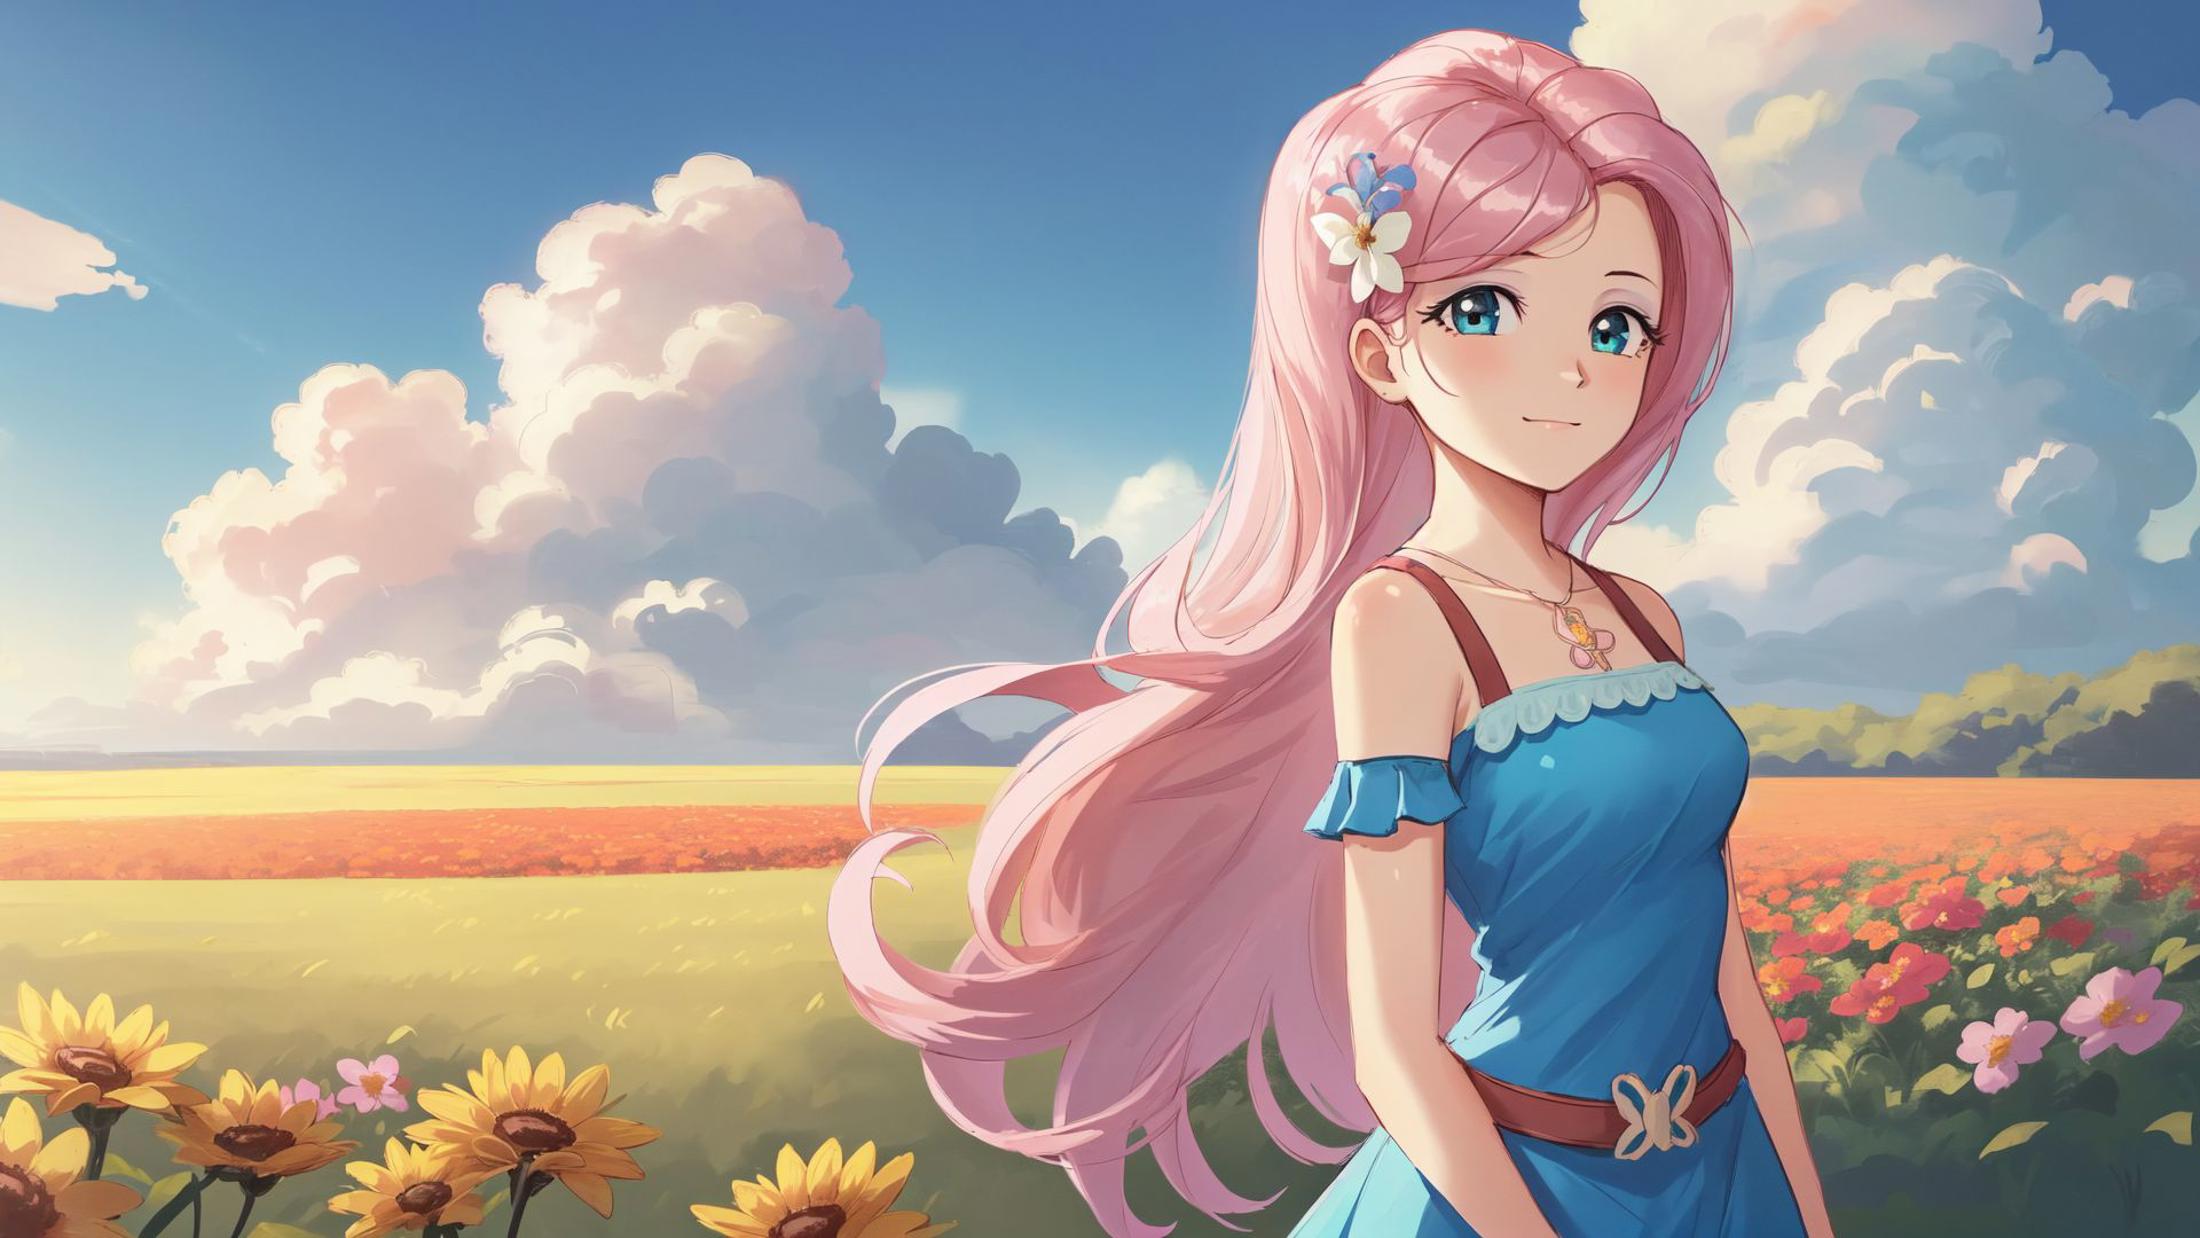 Fluttershy | My Little Pony / Equestria Girls image by marusame